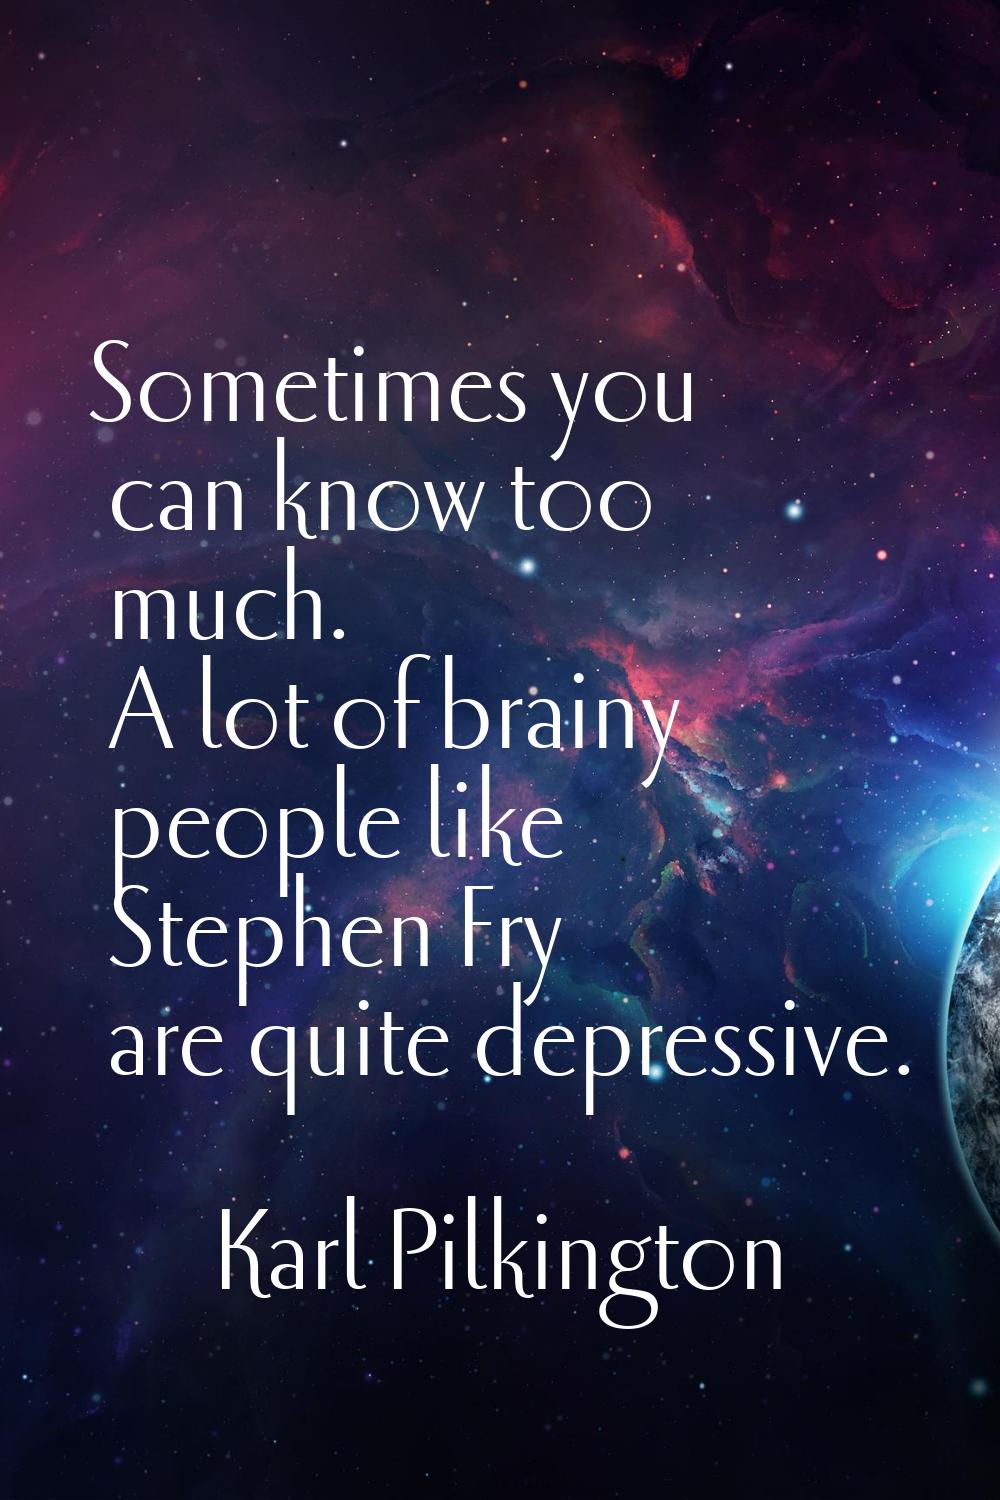 Sometimes you can know too much. A lot of brainy people like Stephen Fry are quite depressive.